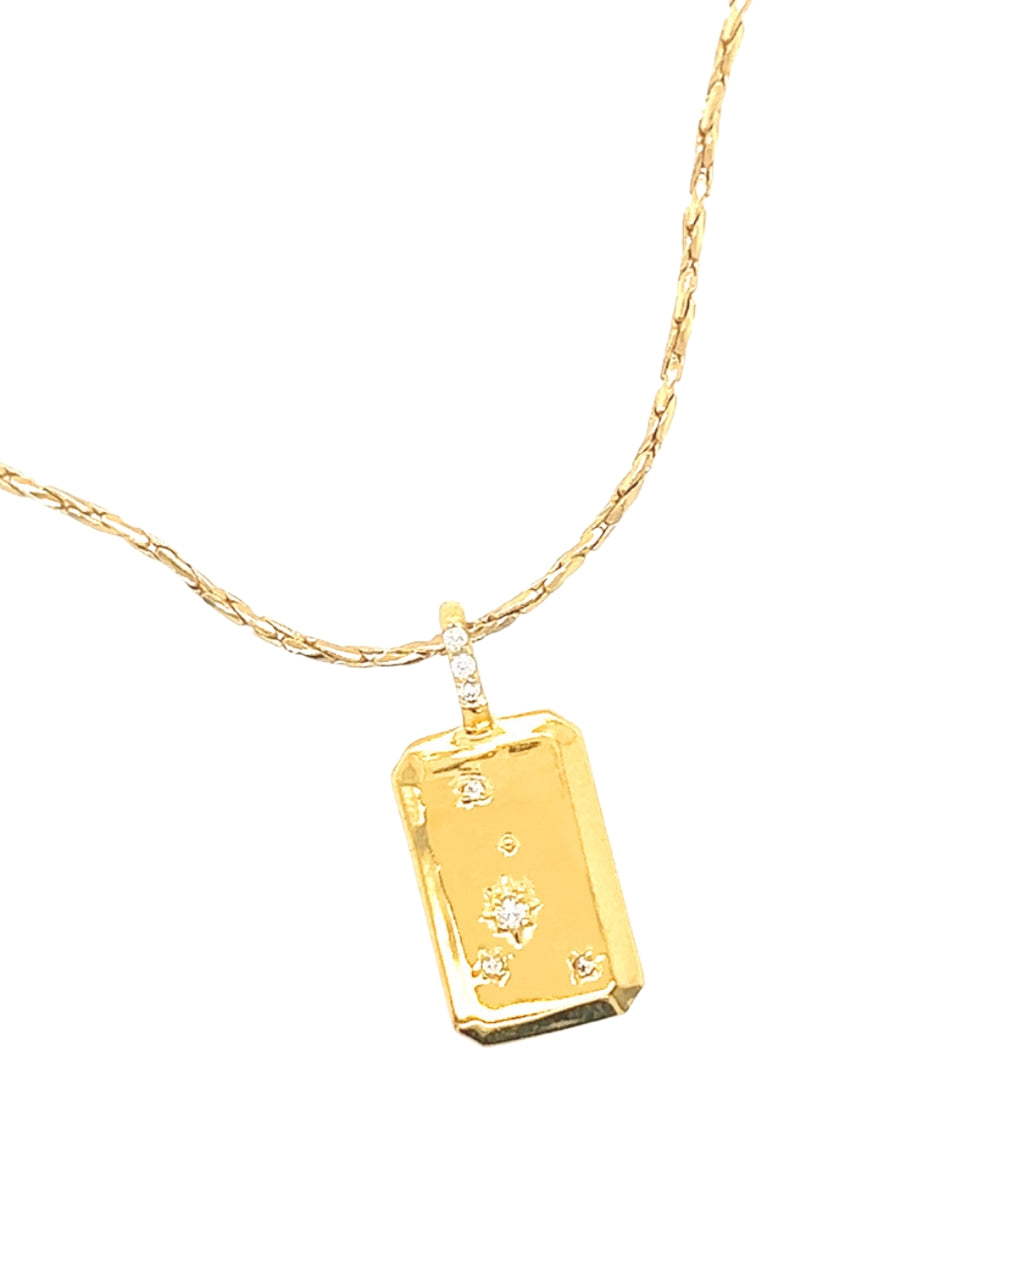 Gold Cancer Constellation Zodiac Pendant on a Gold Necklace Chain